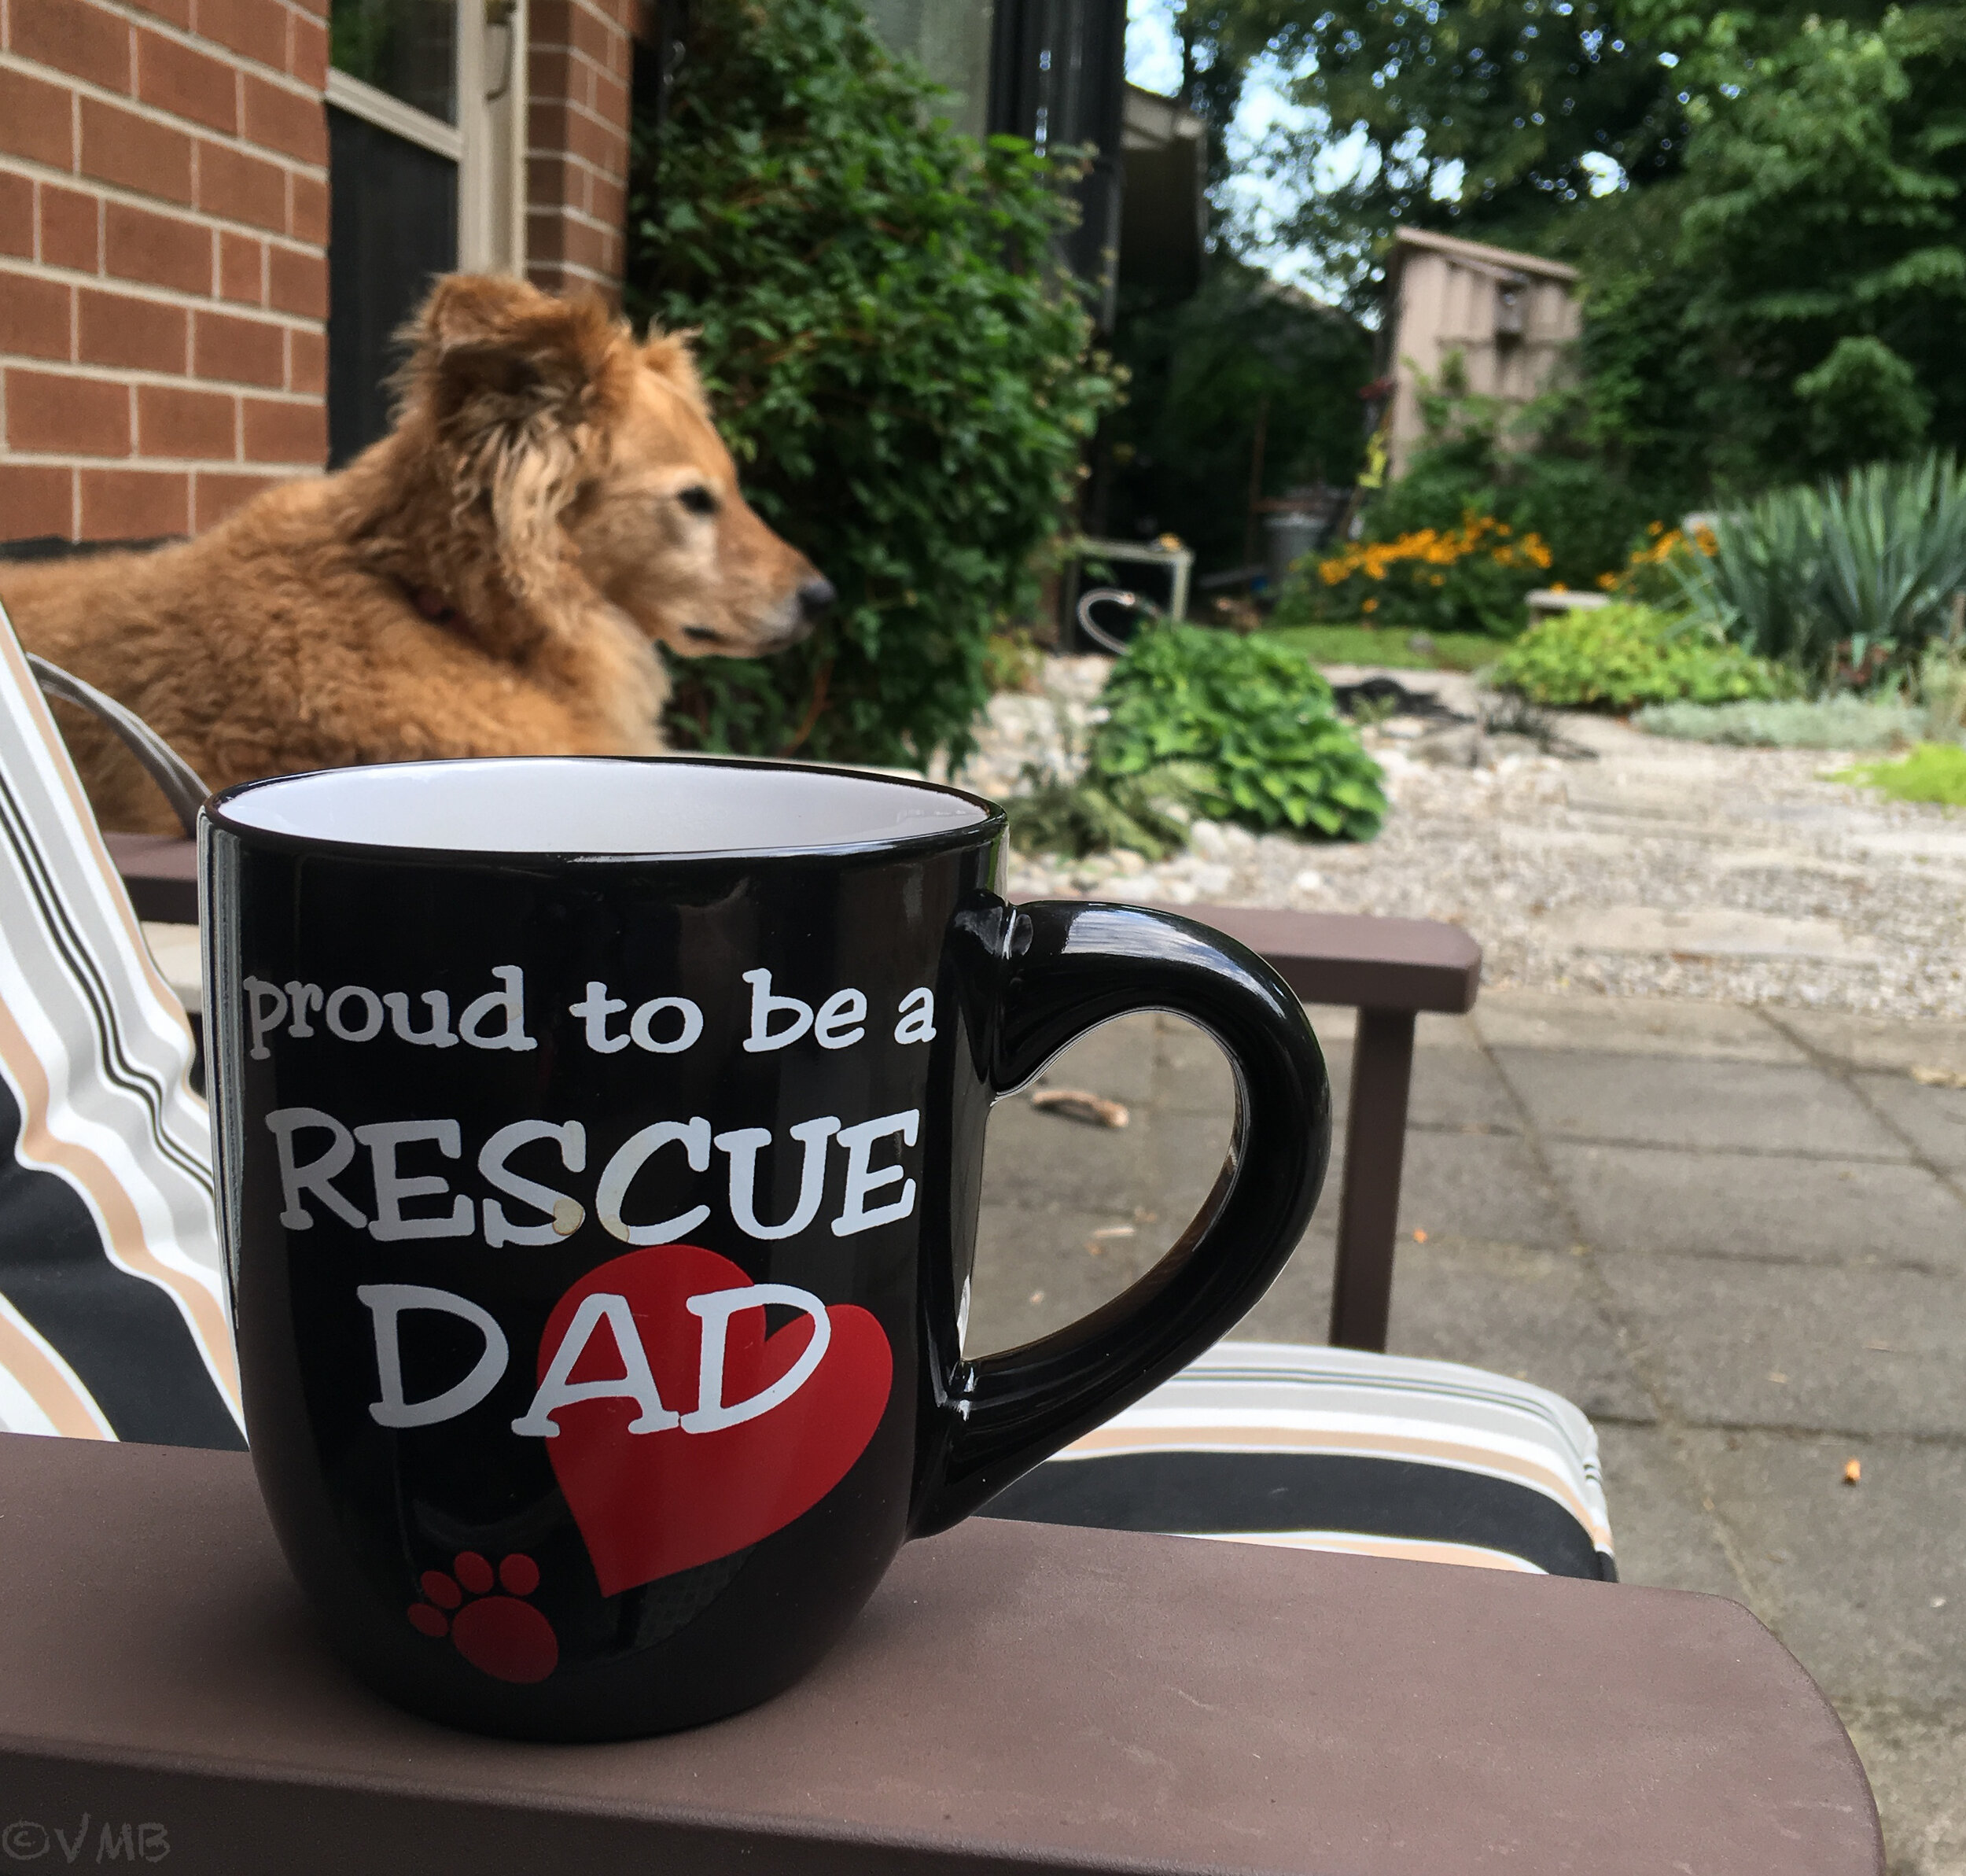 Proud to be a rescue dad coffee mug with our rescue dog holly in the background..jpg